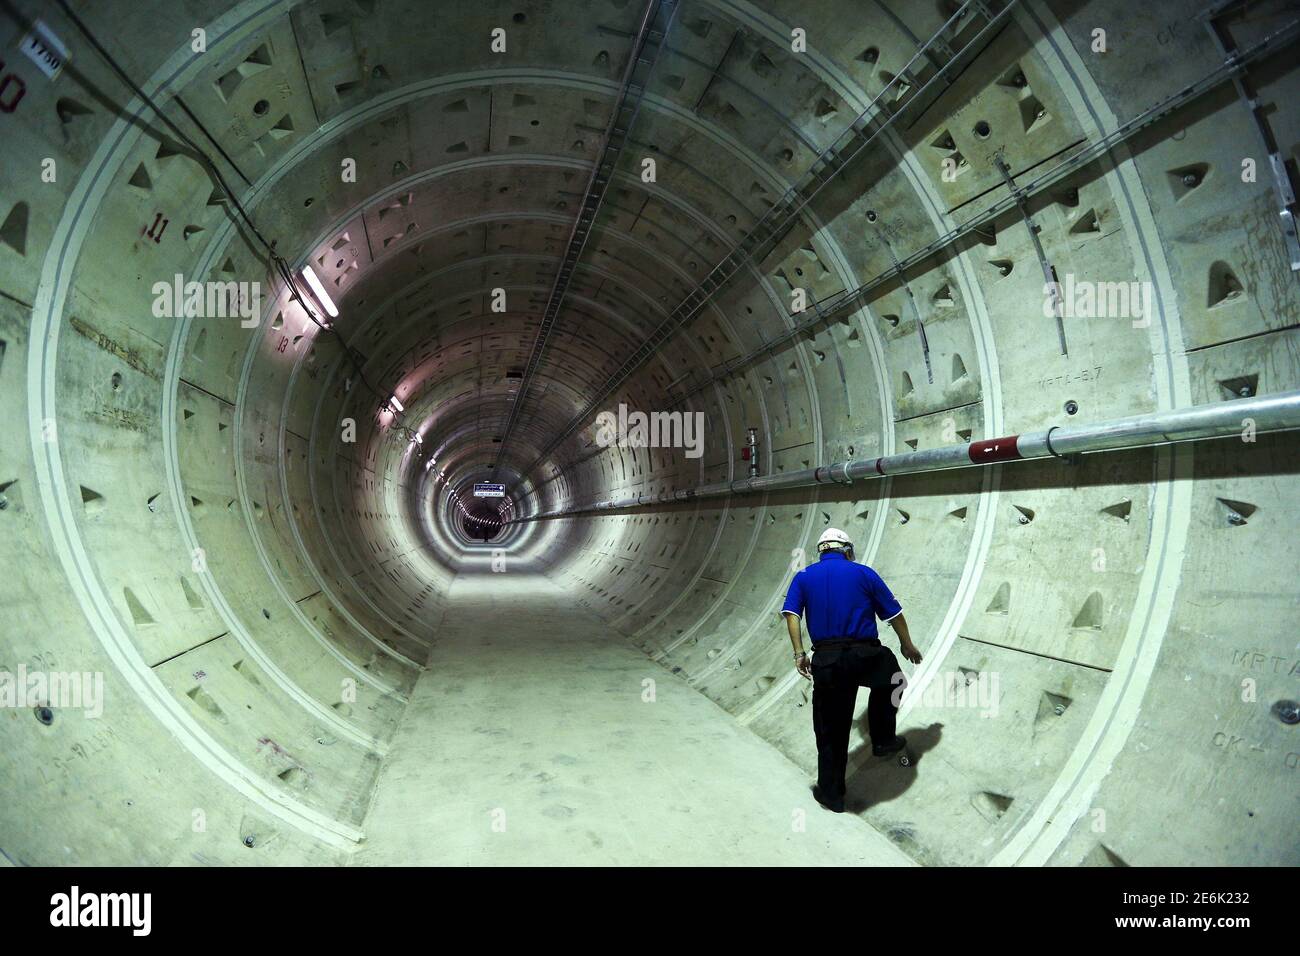 A construction worker walks inside a tunnel under the Chao Phraya river at a Mass Rapid Transit subway station in Bangkok, Thailand, December 14, 2015. REUTERS/Athit Perawongmetha Stock Photo